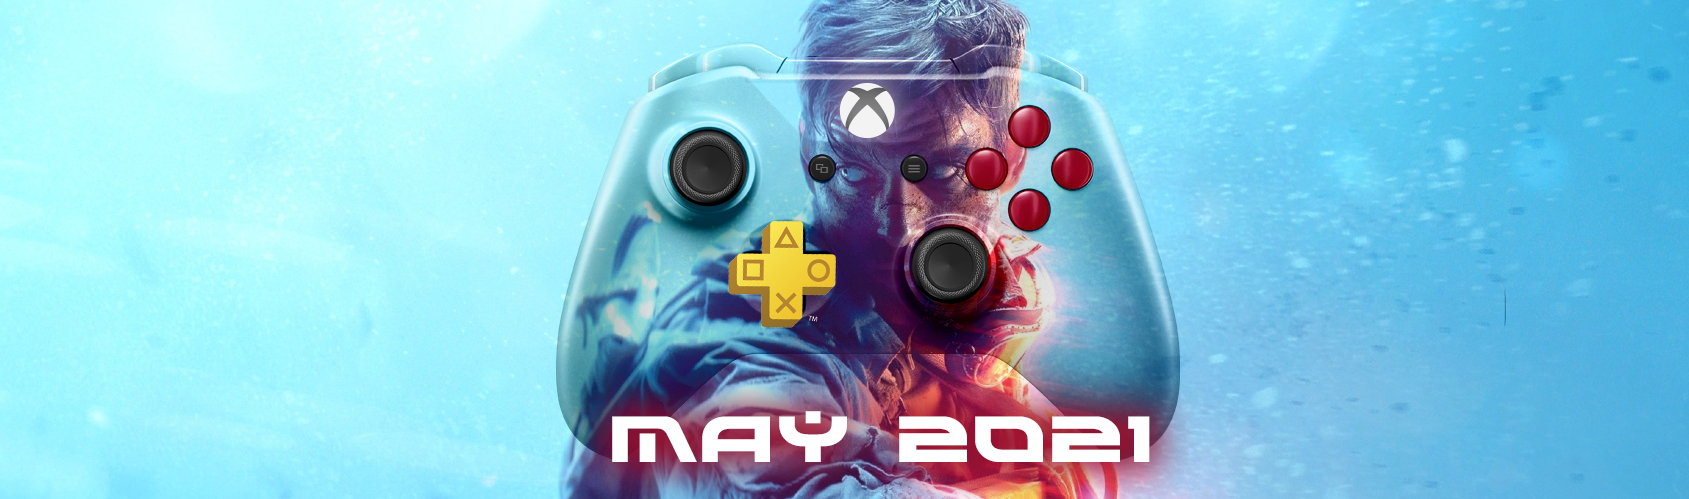 PlayStation Plus Games for May Revealed-Custom Controllers UK